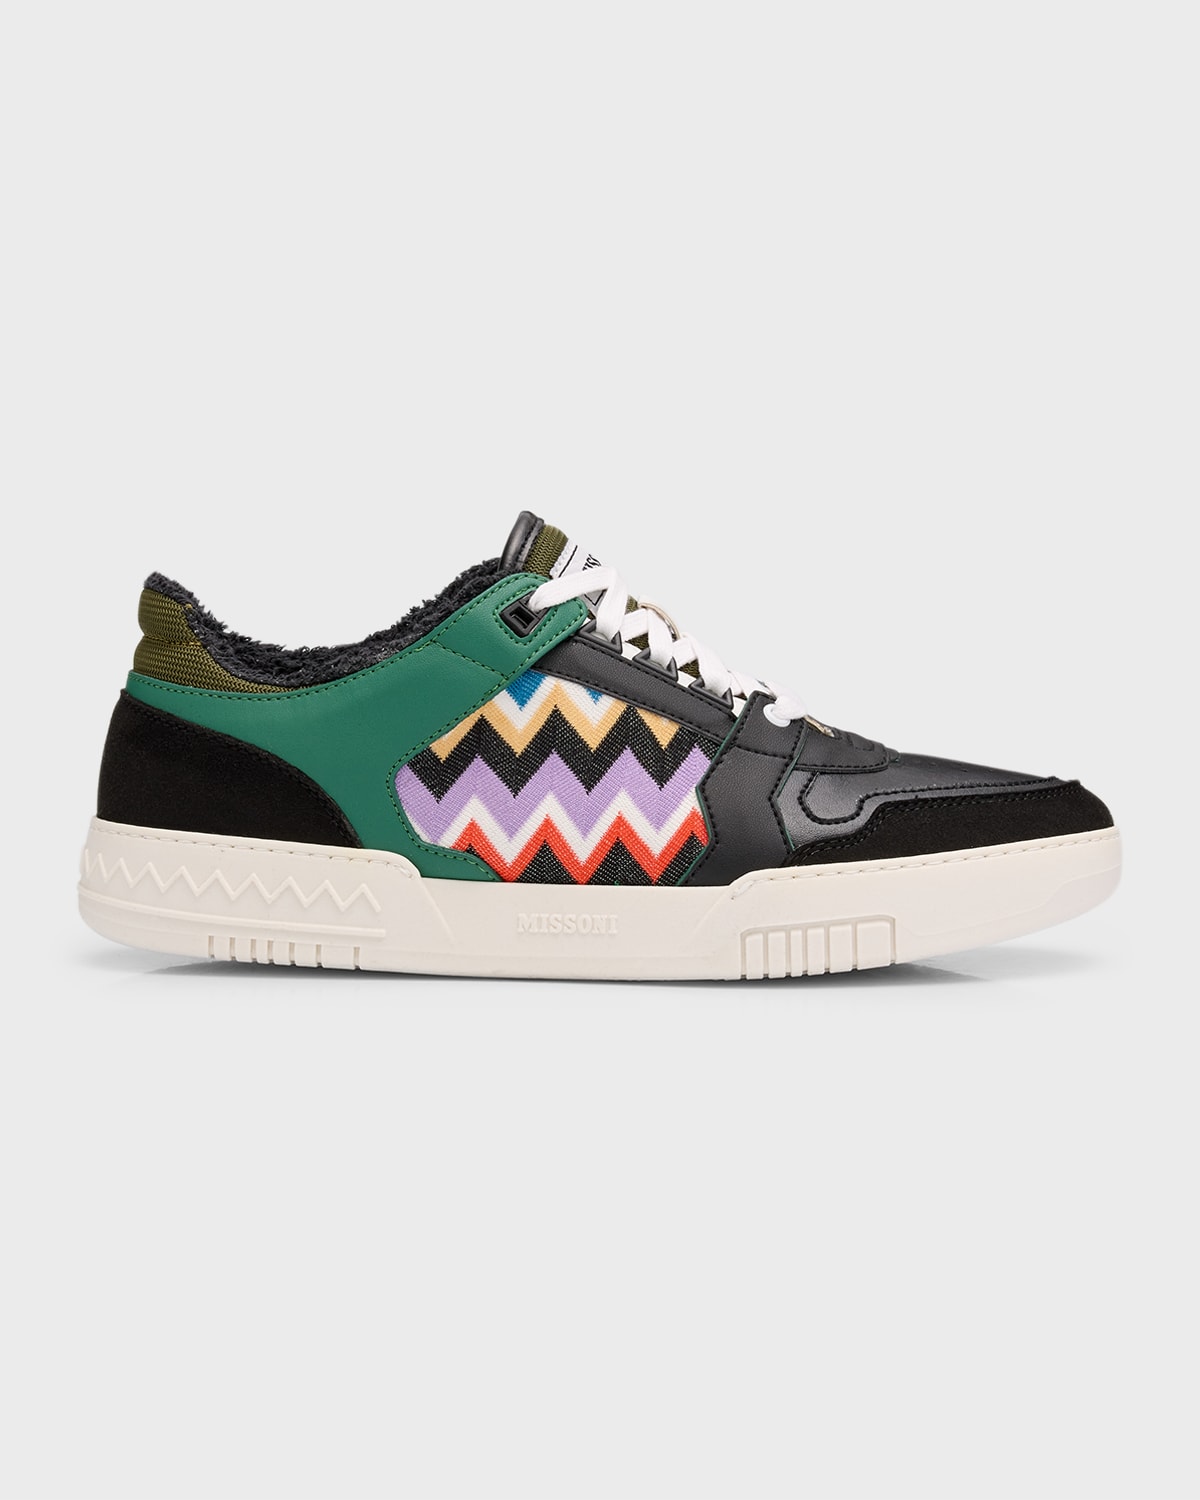 Missoni Men's Basket Leather And Textile Low-top Trainers In Black/green